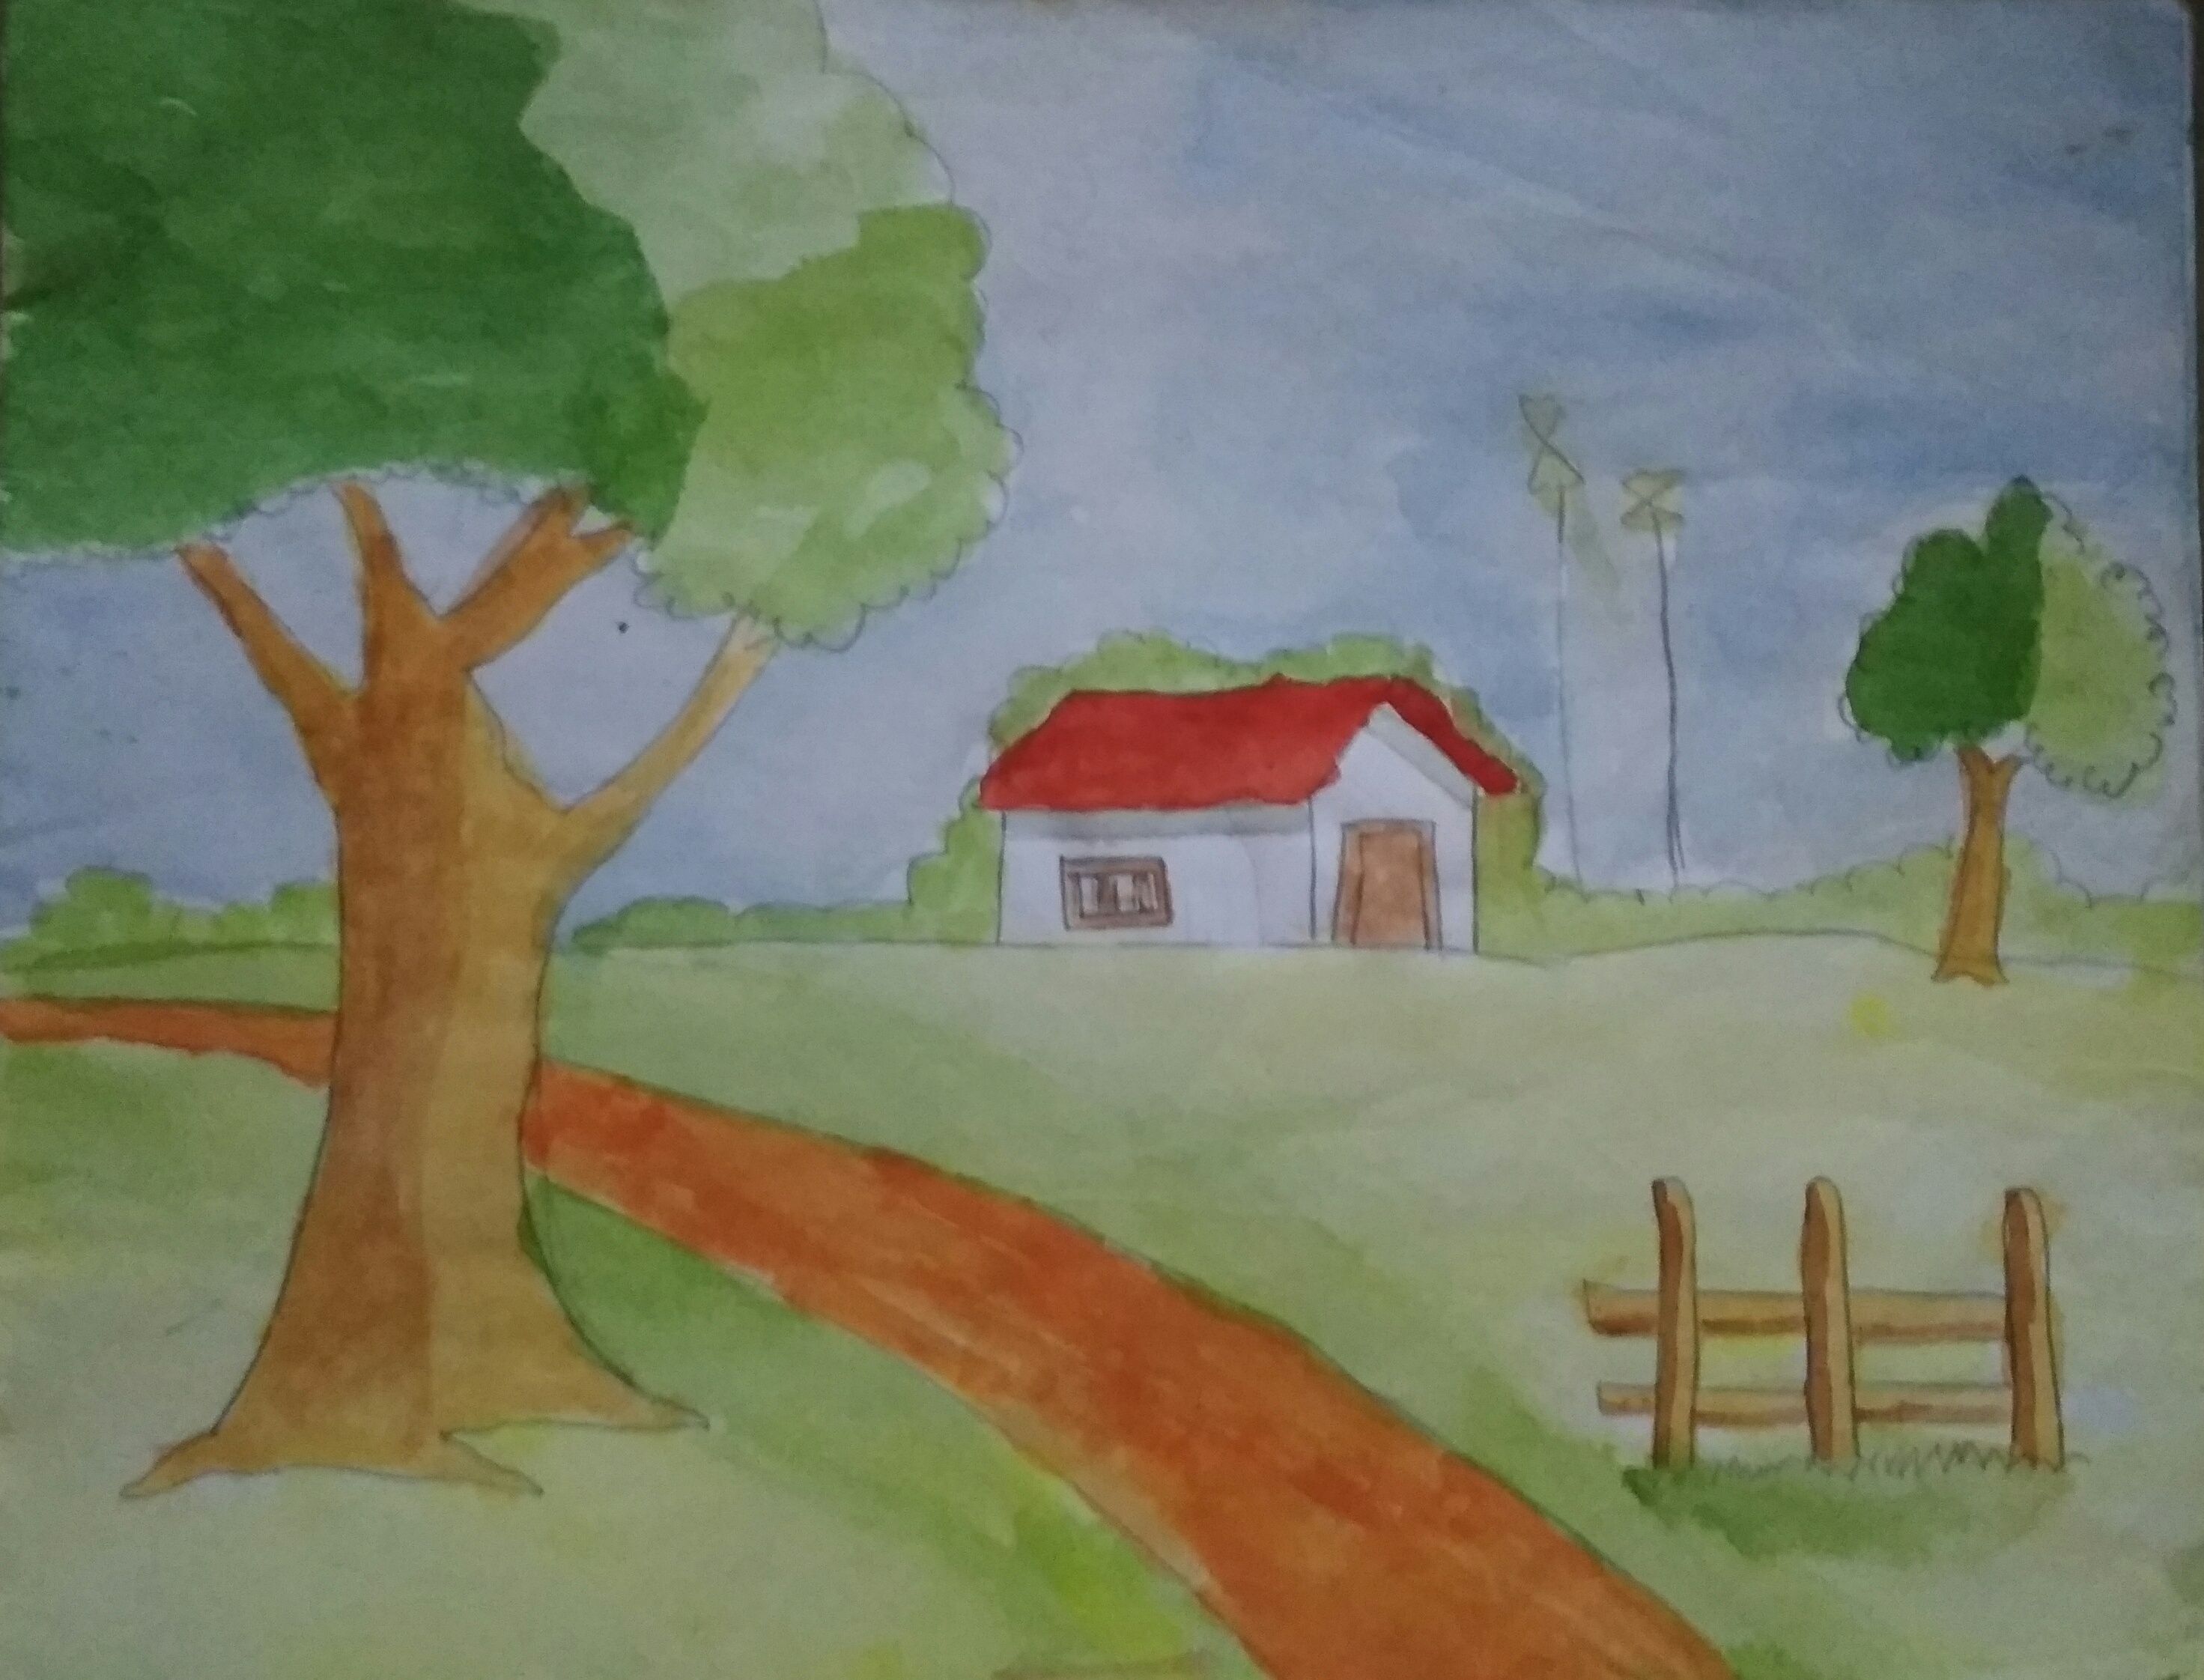 indian village scenery drawing with oil pastel | village life scenery  drawing | nature Village - YouTube